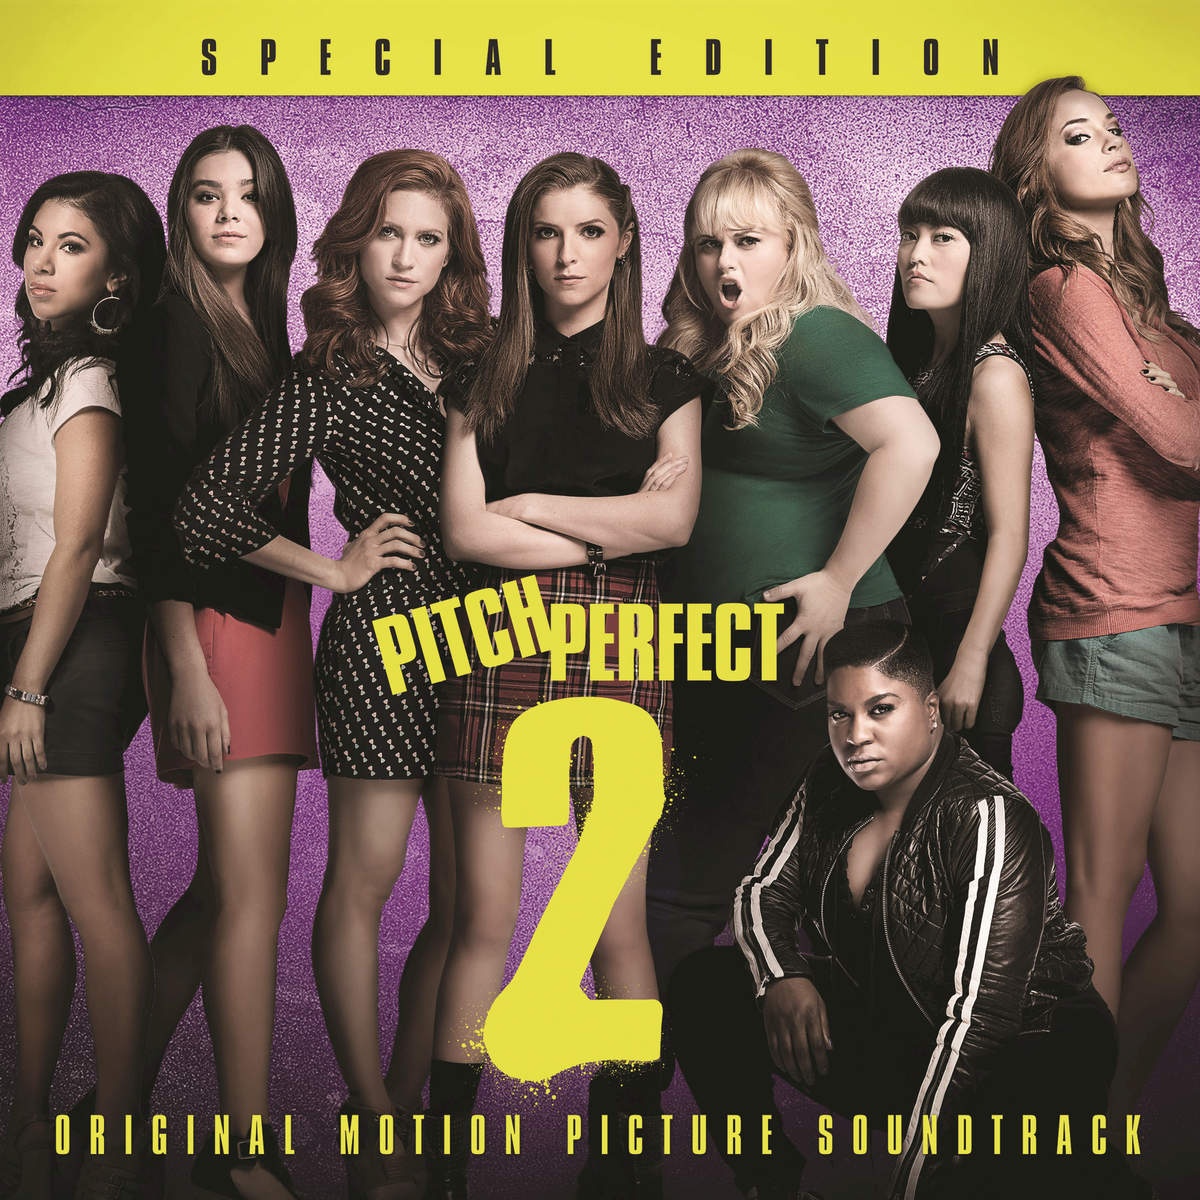 Back To Basics (From "Pitch Perfect 2" Soundtrack)